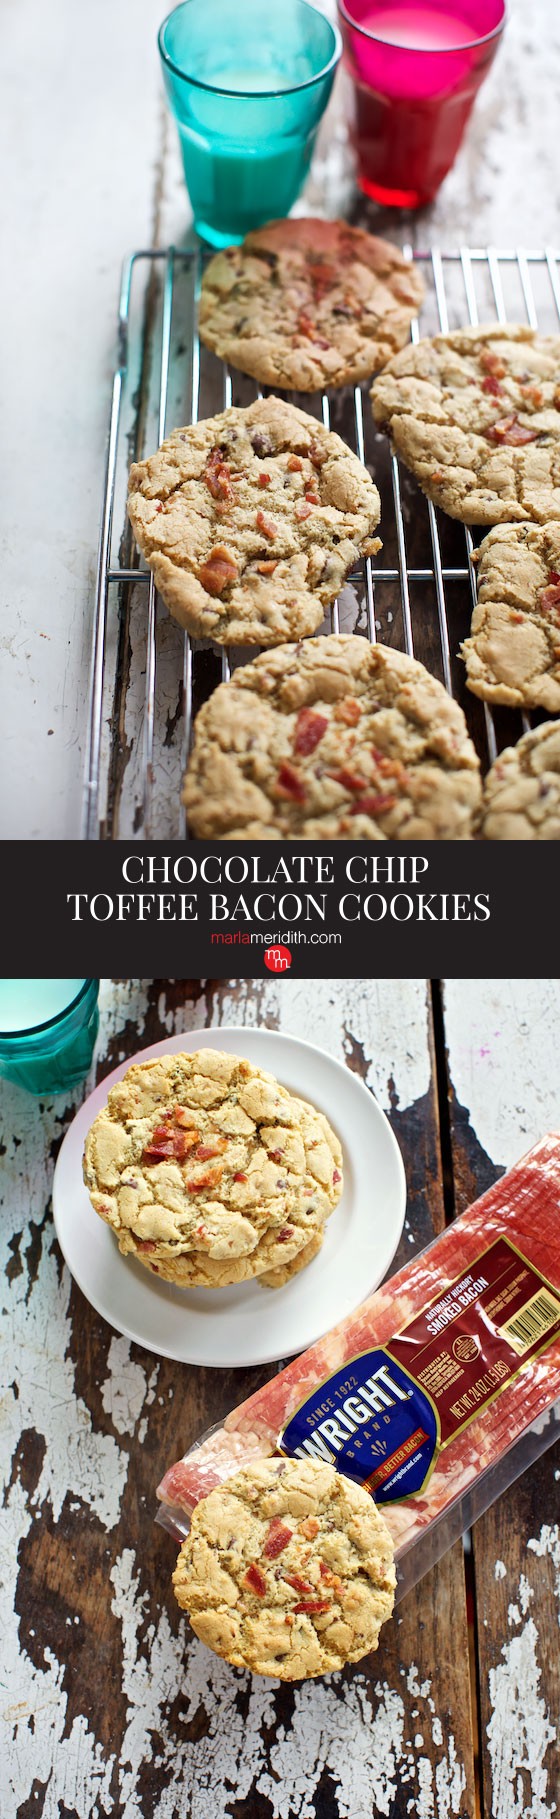 Chocolate Chip Toffee Bacon Cookies are seriously the best cookies ever! MarlaMeridith.com ( @marlameridith ) #BaconTheWrightWay